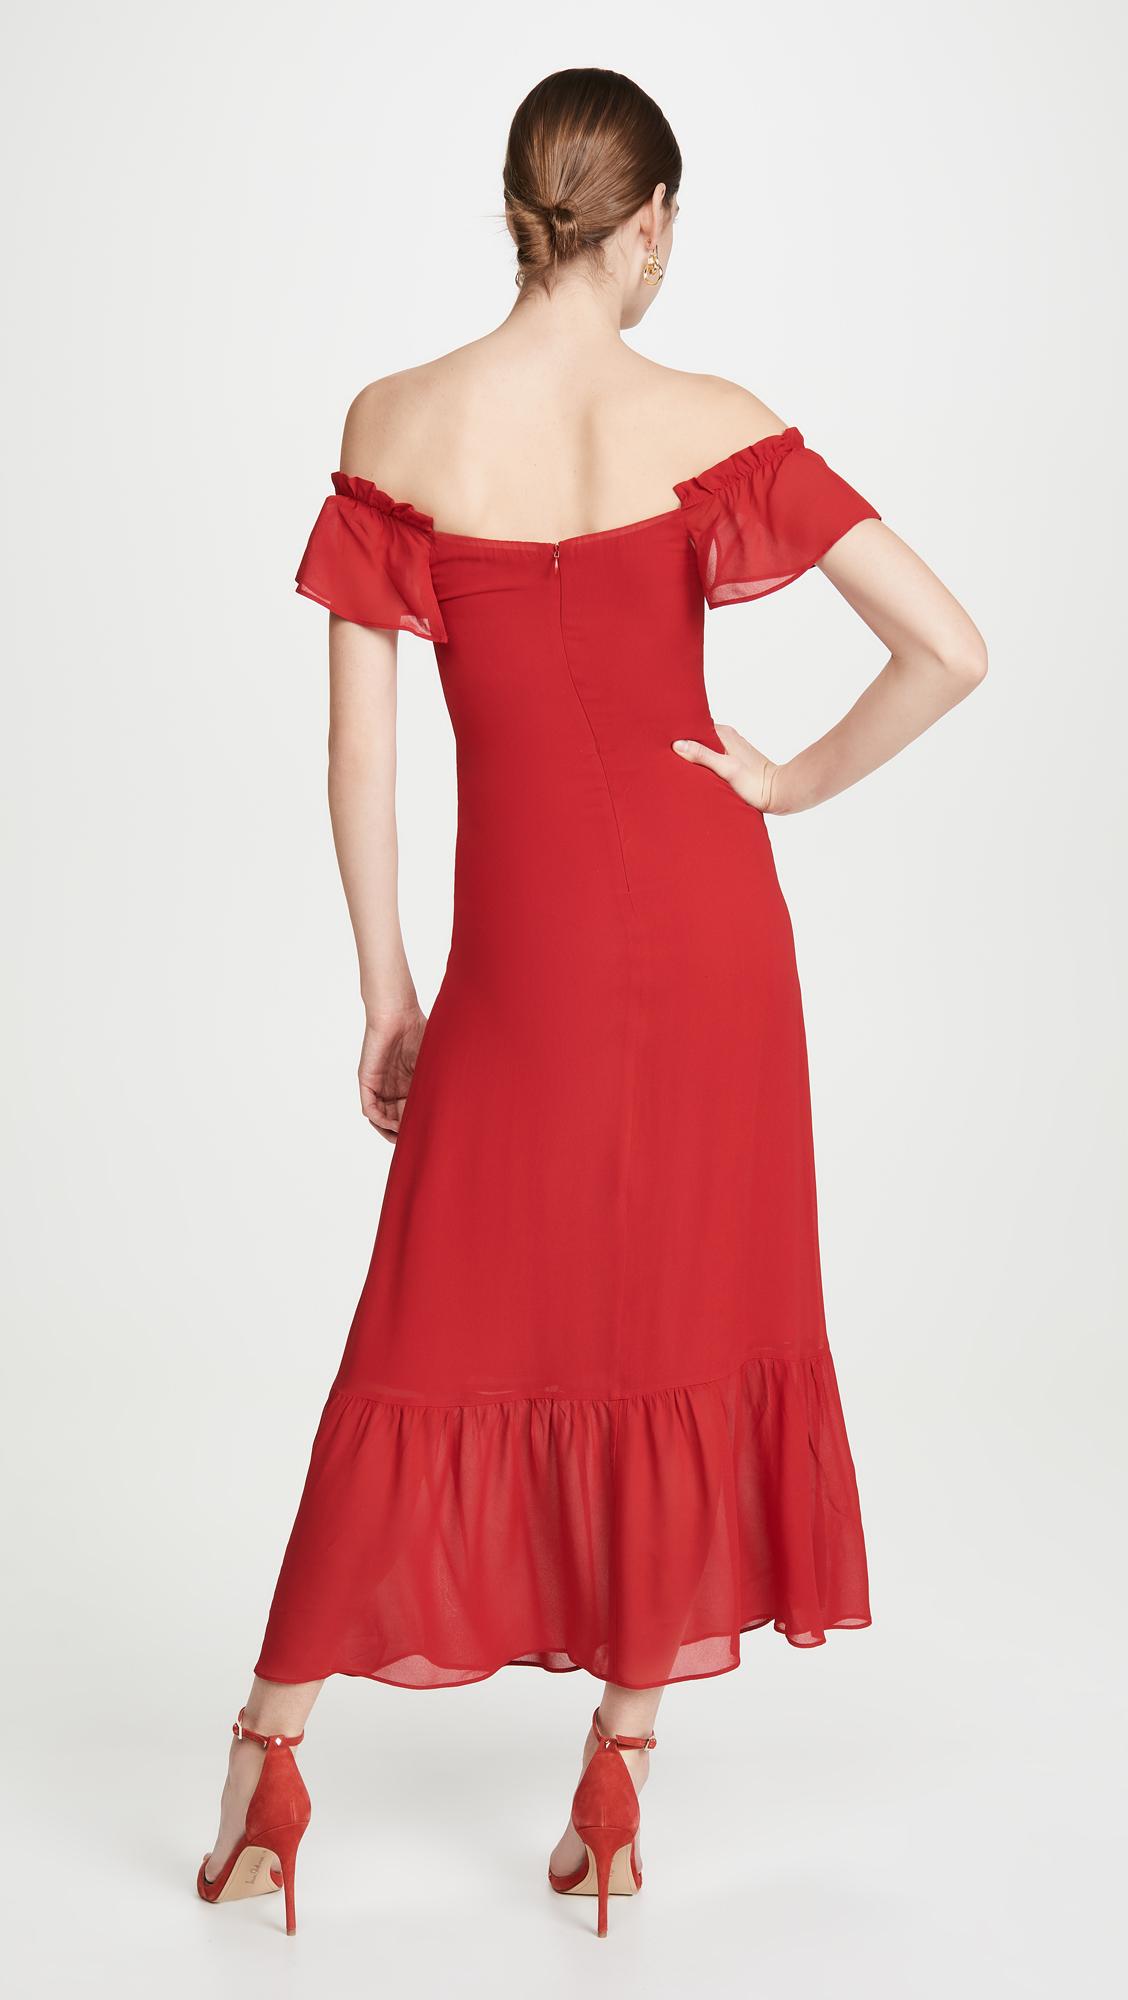 Reformation Synthetic Butterfly Dress in Cherry (Red) - Lyst